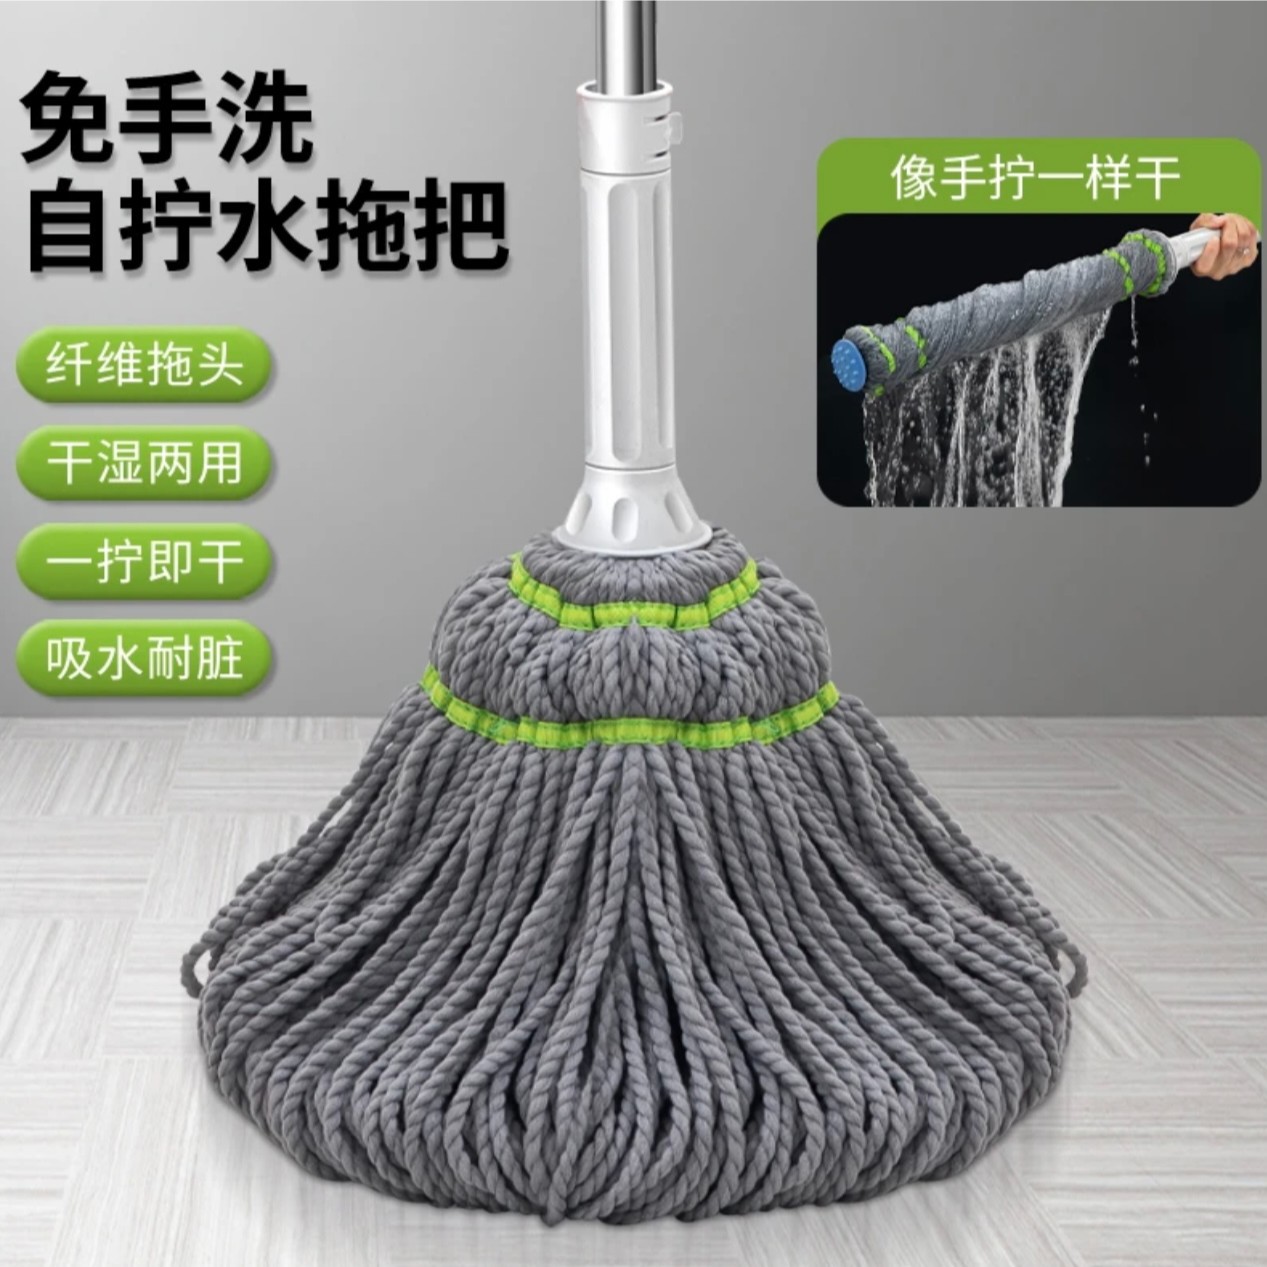 telescopic rod hand wash-free self-drying floor mop wet and dry household lazy mop cotton thread water sucking mop